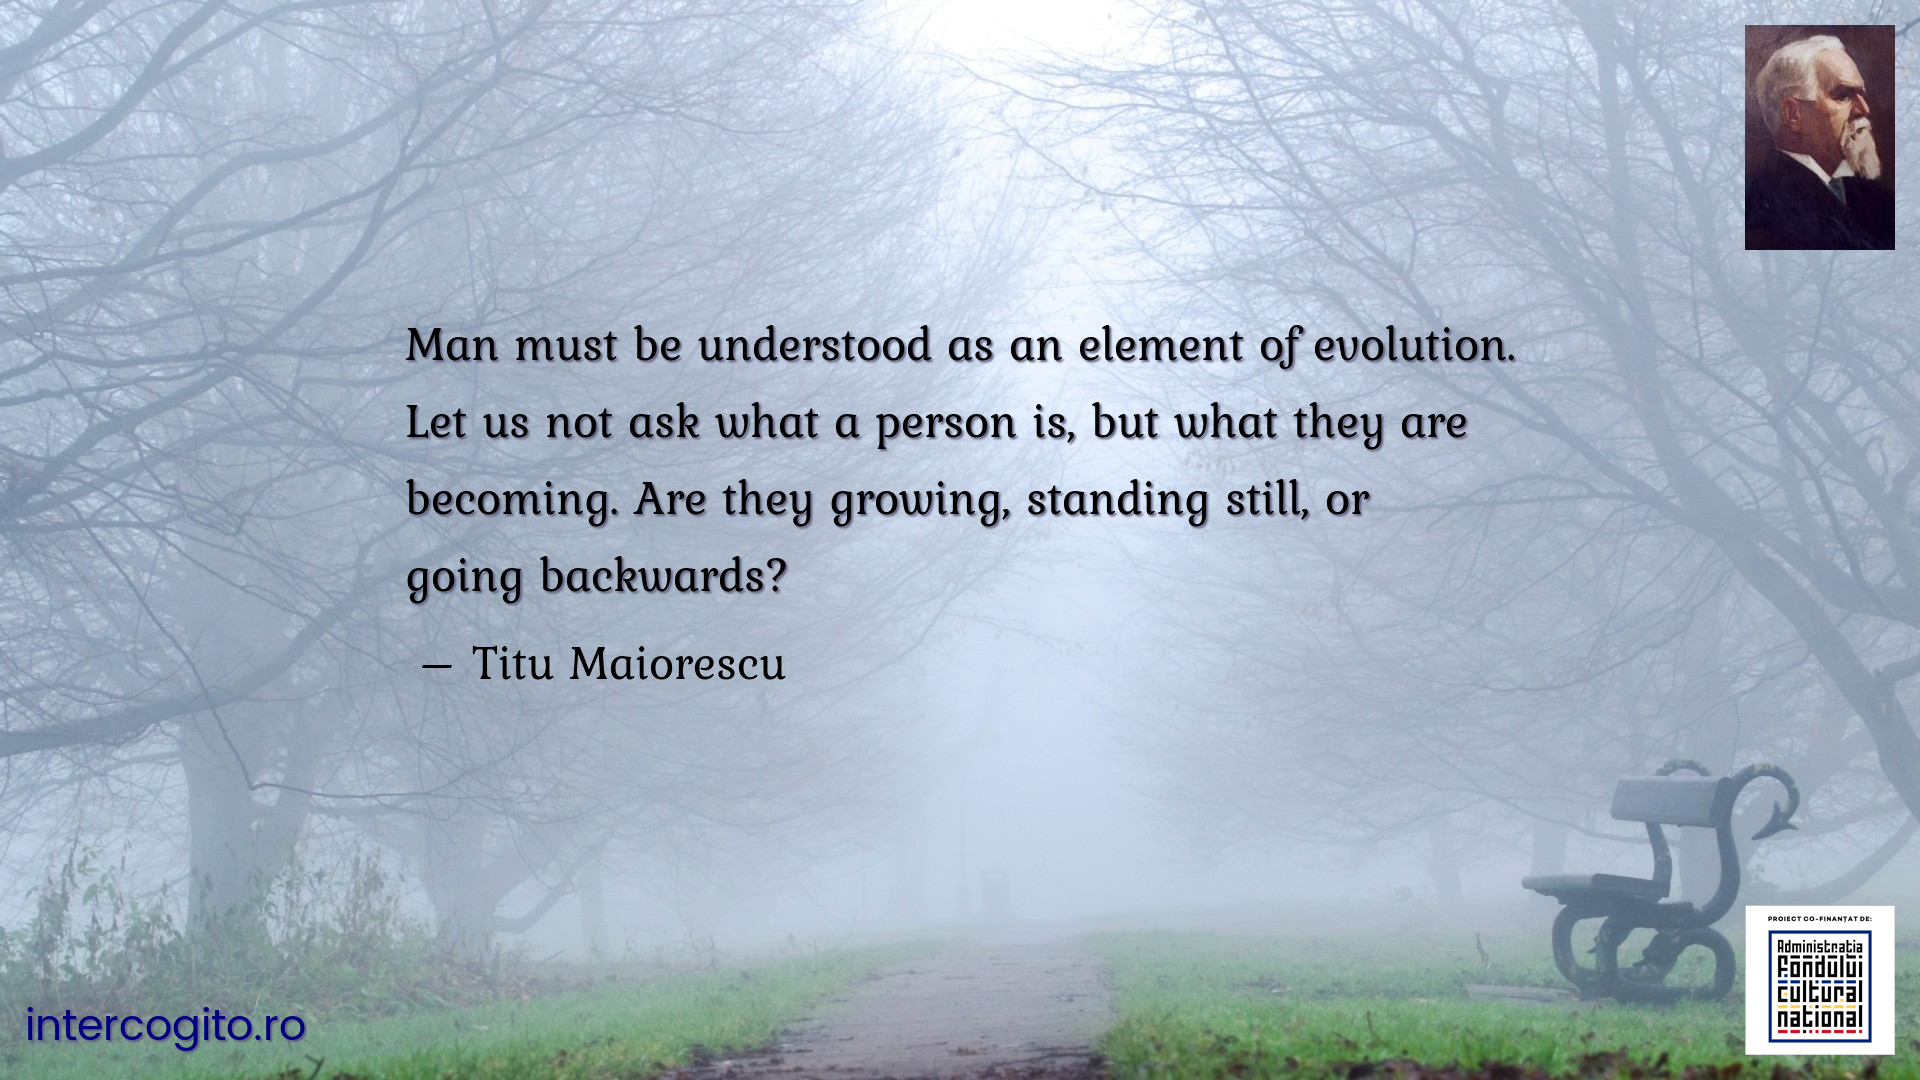 Man must be understood as an element of evolution. Let us not ask what a person is, but what they are becoming. Are they growing, standing still, or going backwards?